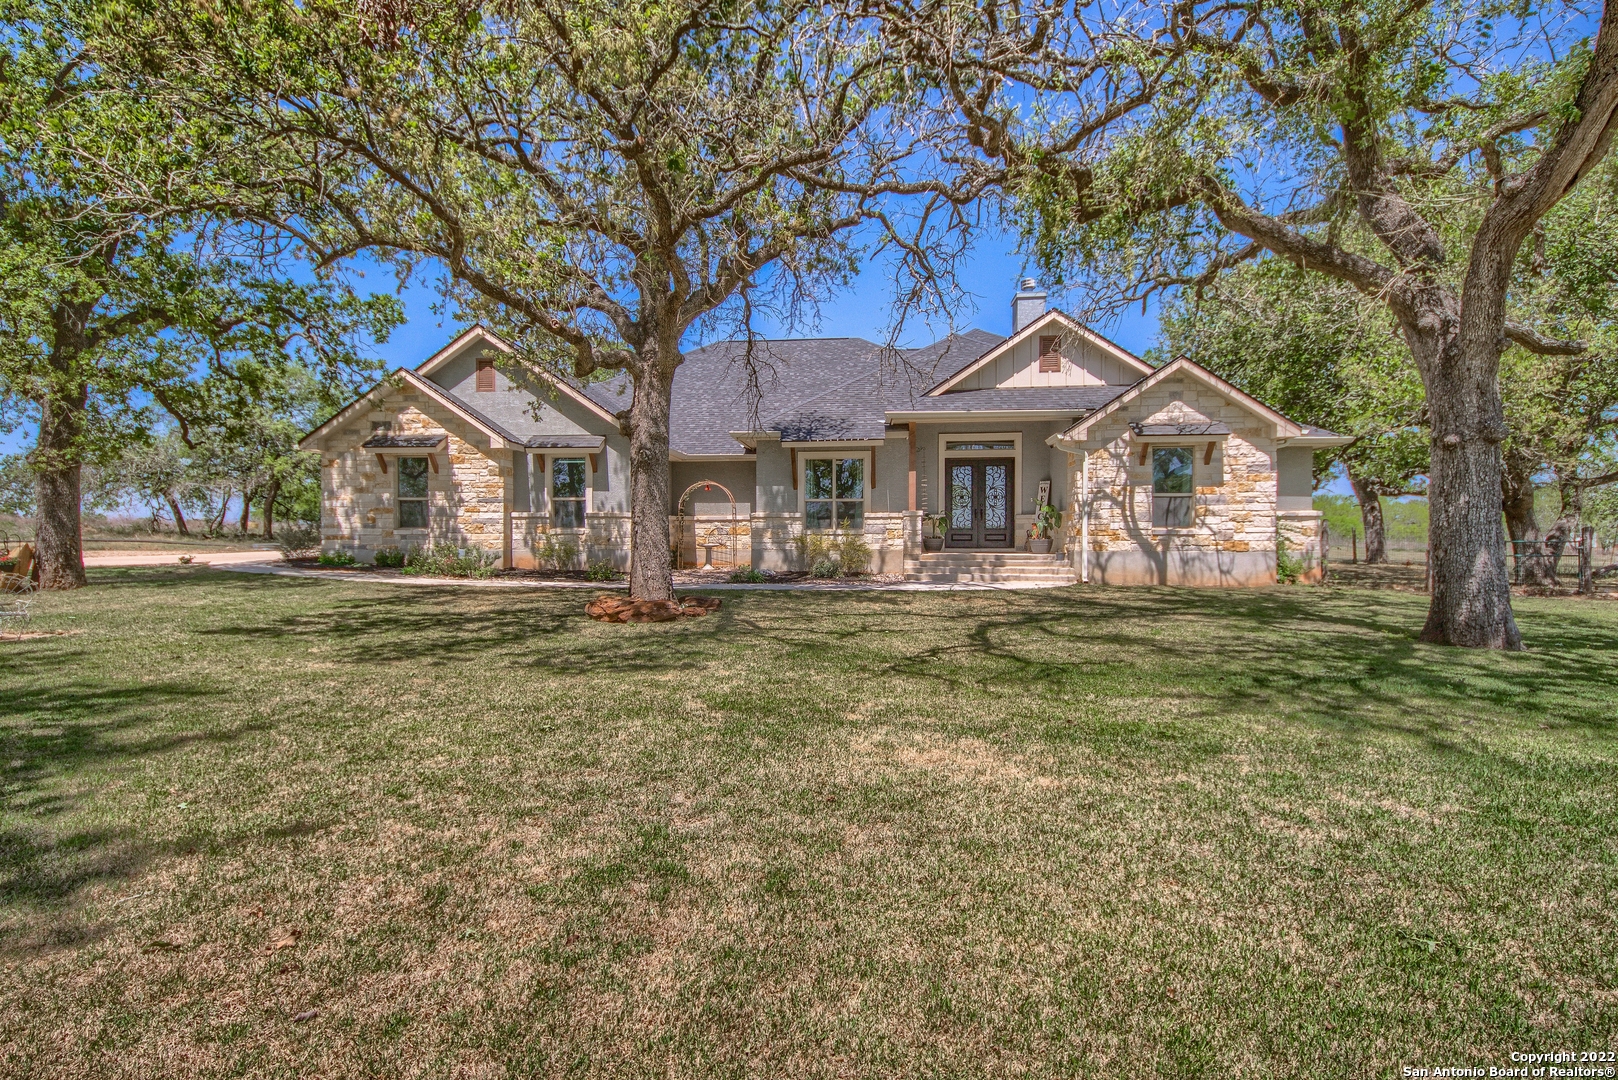 Elegant custom designed home in the country with details for days! This 2019 custom built home is a Stunner with so many extras!! On a 1.5 acre tree filled lot, this property has the potential to expand with an additional 11+ surrounding acres! With 2,890 livable sqft this 4 bedroom 3.5 bath home is exquisite and boasts a very large back yard covered patio ready for entertaining! The back patio has a beautiful wood burning rock fireplace, is wired for TV, and is already stubbed for gas for your future outdoor kitchen! In the spacious master suite you will find tray ceilings, back porch access, & beautiful french doors. Beyond the french doors lies a showcase full bath including garden tub, walk thru shower, separate vanities, his & her double walk-in closets, and bluetooth system for music, lighting, & exhaust fan. And talk about a showstopper kitchen with double islands, double convection wall ovens, gas cooktop, and a huge walk around pantry with tons of storage! Other features include: barefoot grass, beautiful landscaping w/ sprinkler system, separate office, guest suite with outside access & full bath, side yard fenced off for animals, wifi, additional storage unit with A/C & electricity, additional 300 ft. water well, exterior LED lights, large utility room with sink & mud room.